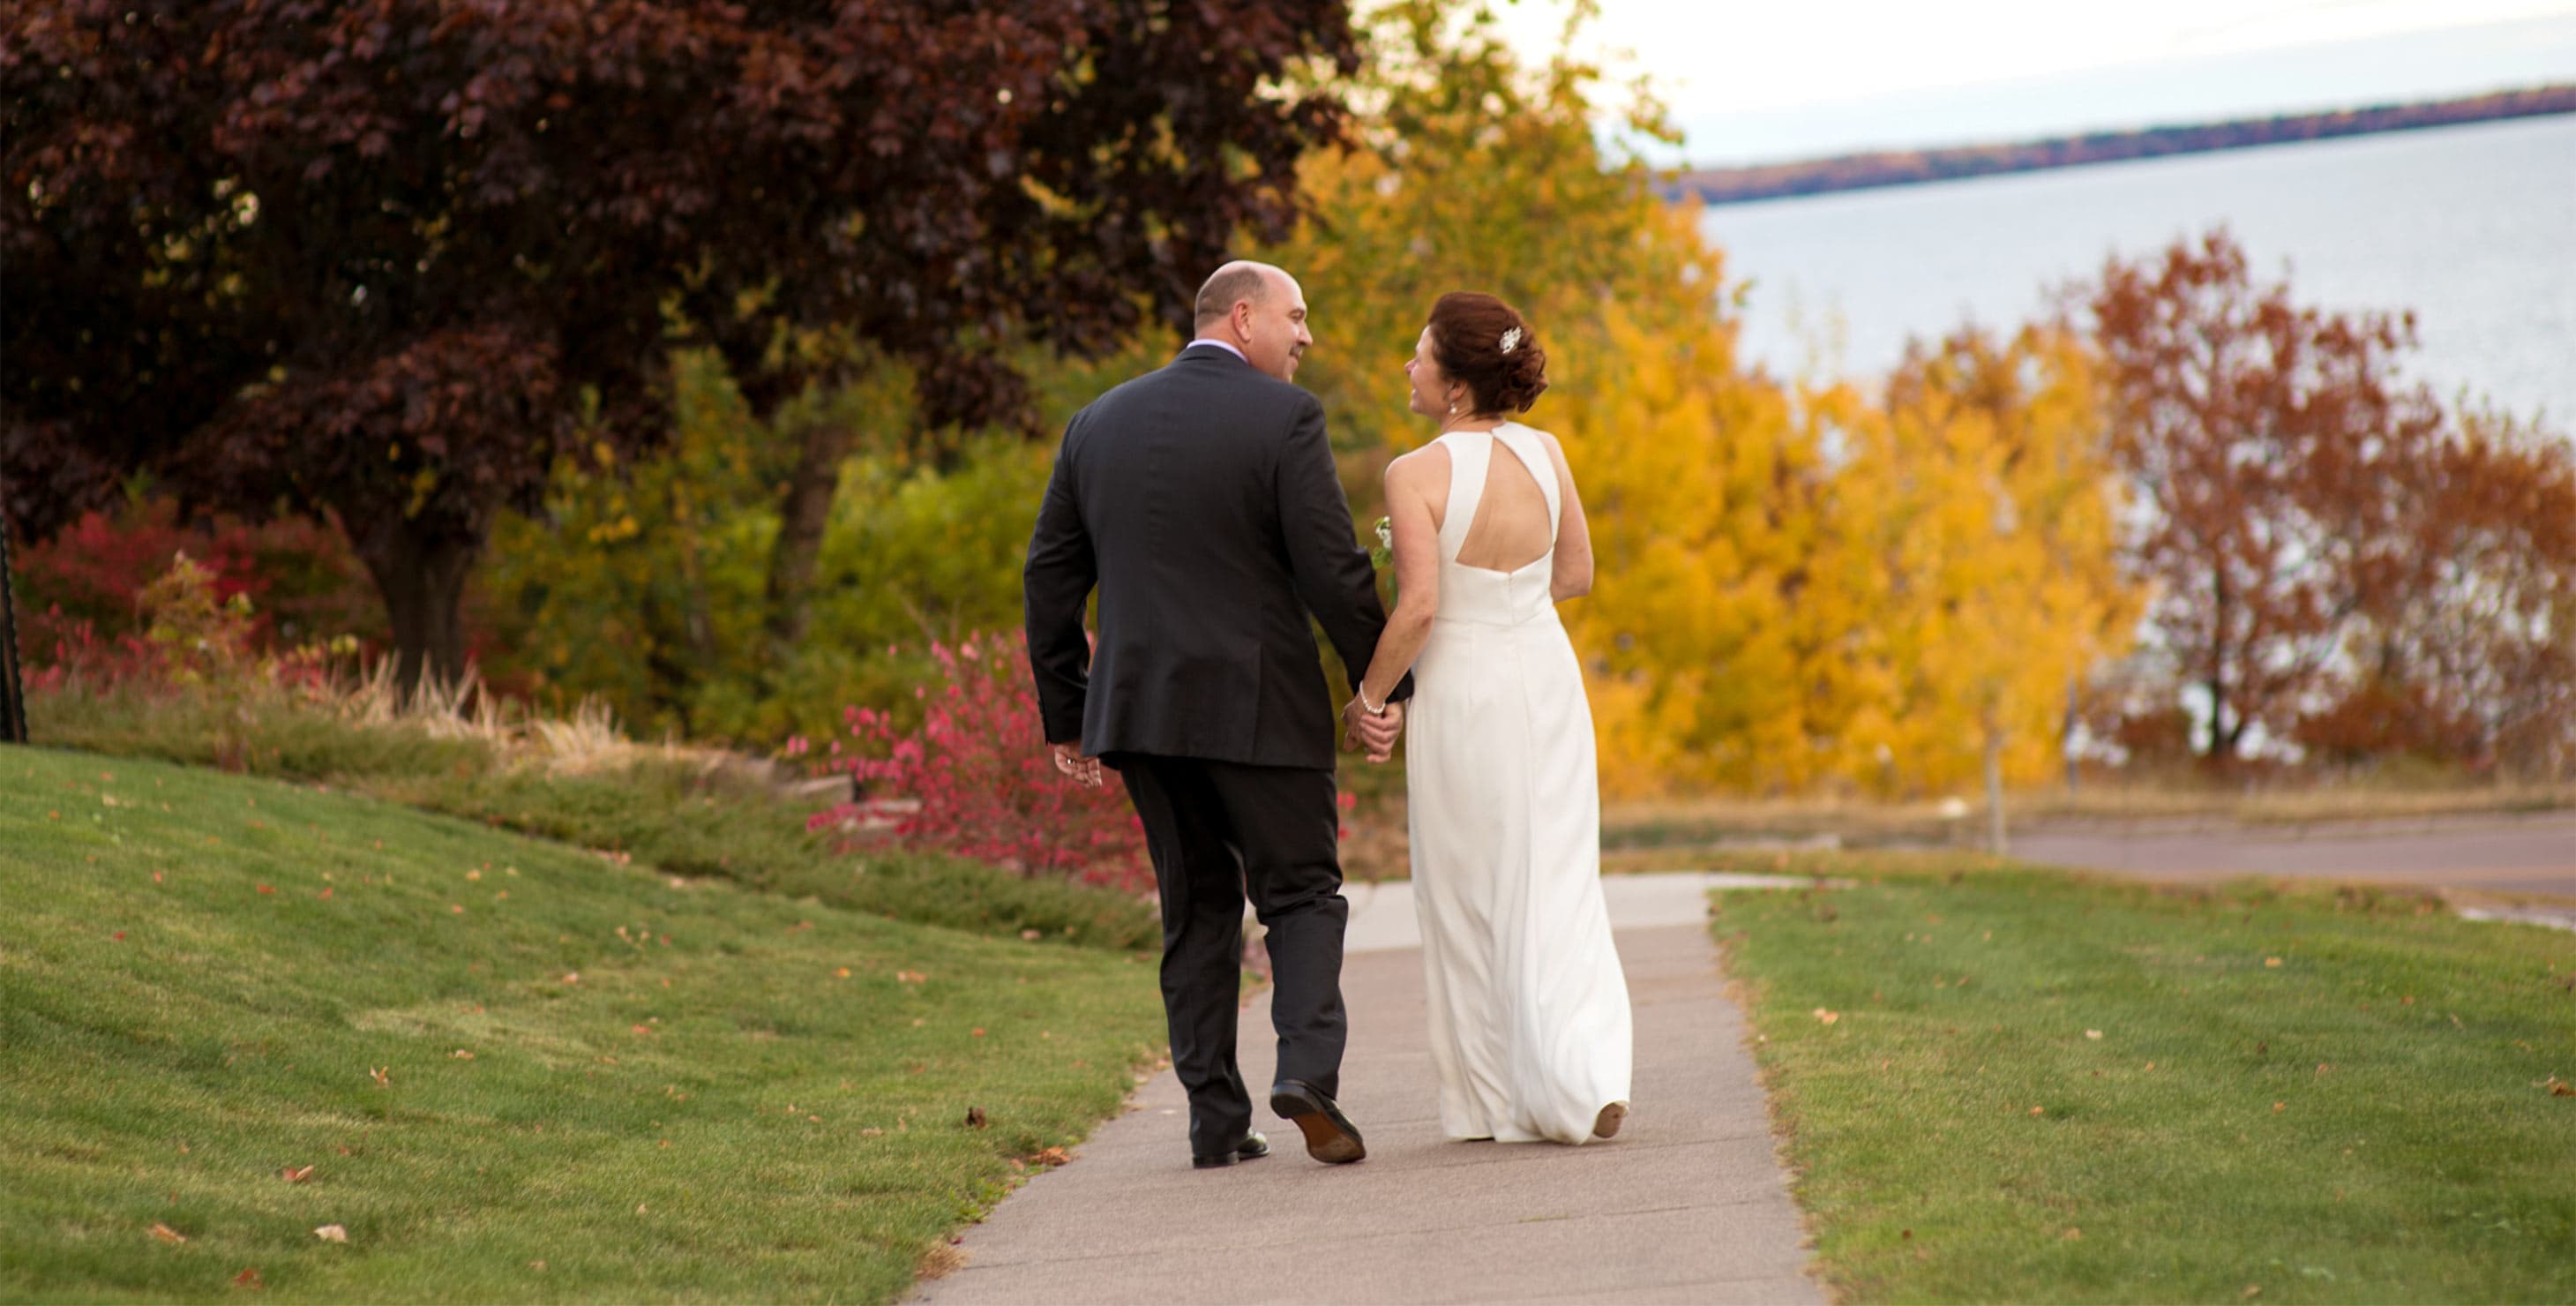 Bride and Groom walking down the sidewalk with lake in background